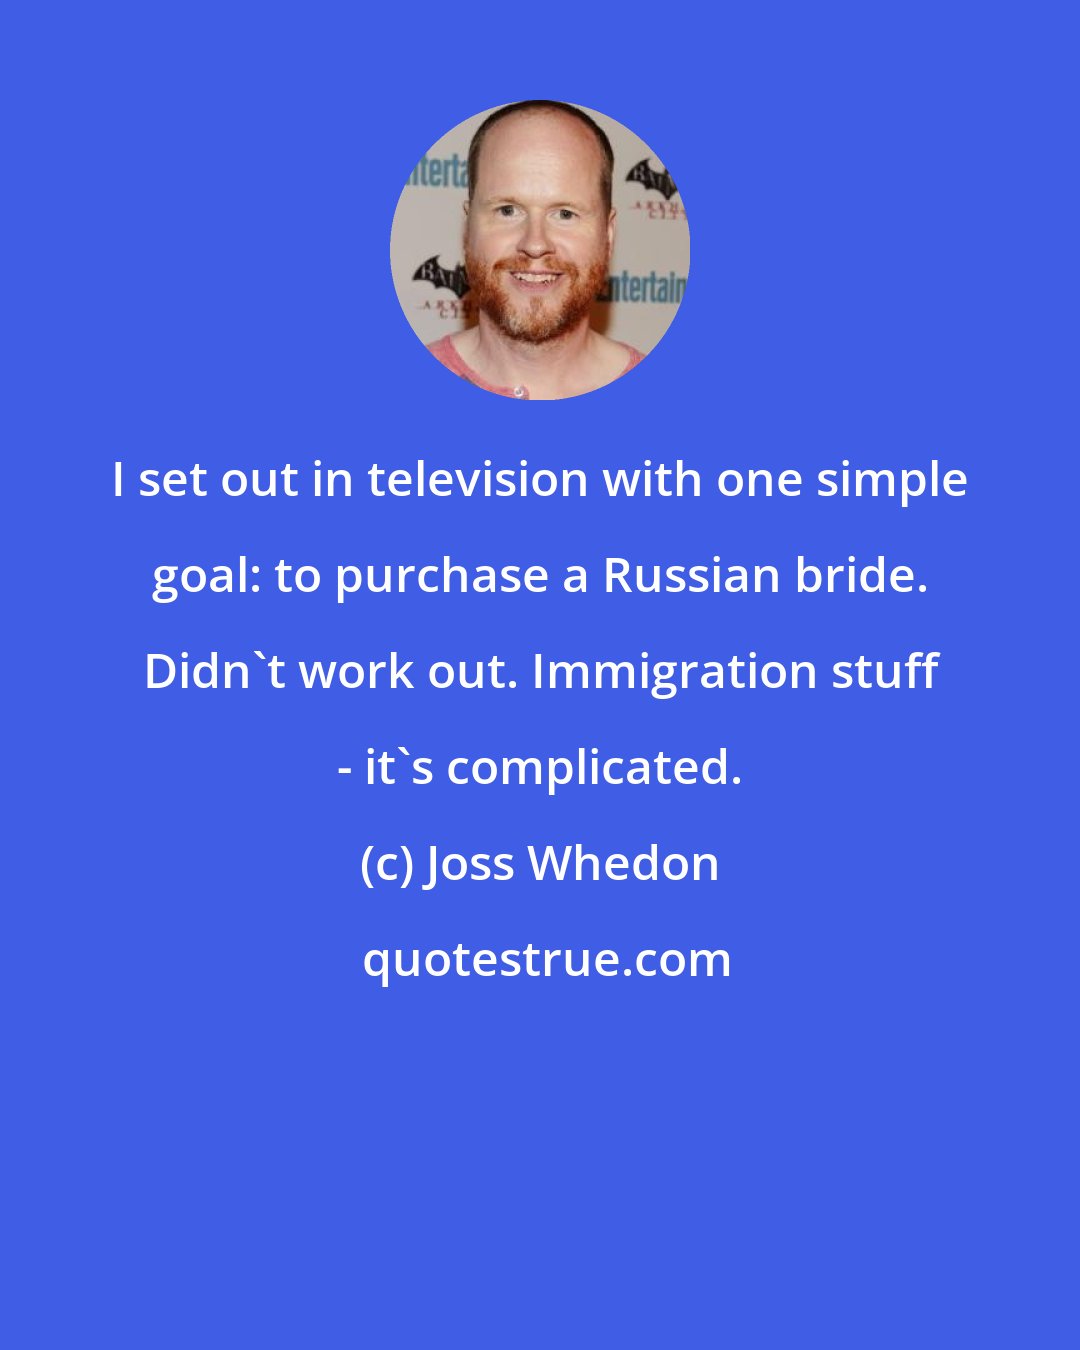 Joss Whedon: I set out in television with one simple goal: to purchase a Russian bride. Didn't work out. Immigration stuff - it's complicated.